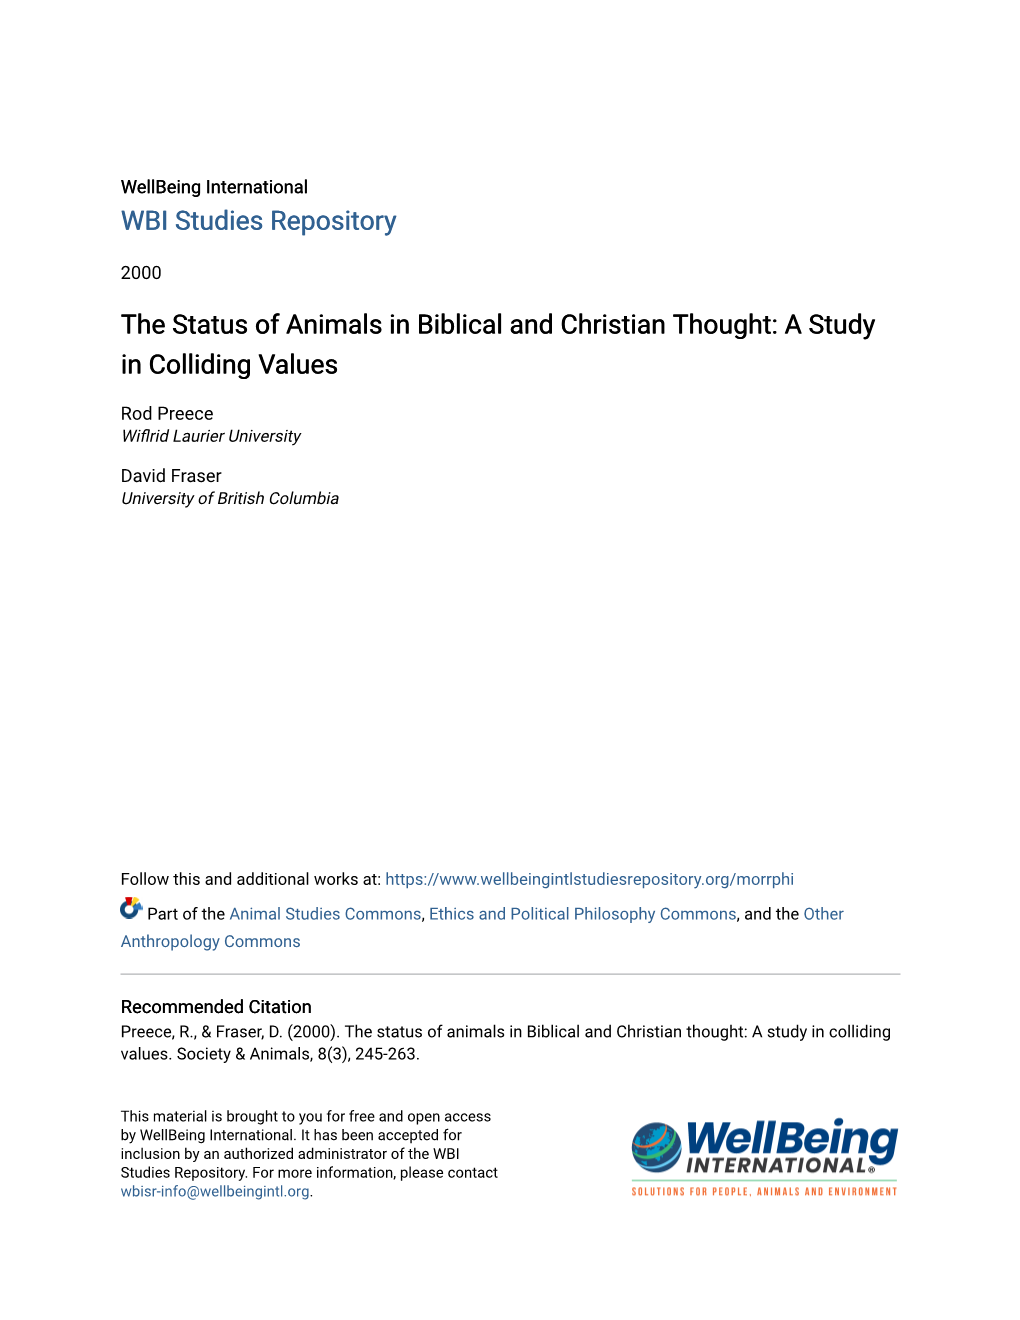 The Status of Animals in Biblical and Christian Thought: a Study in Colliding Values